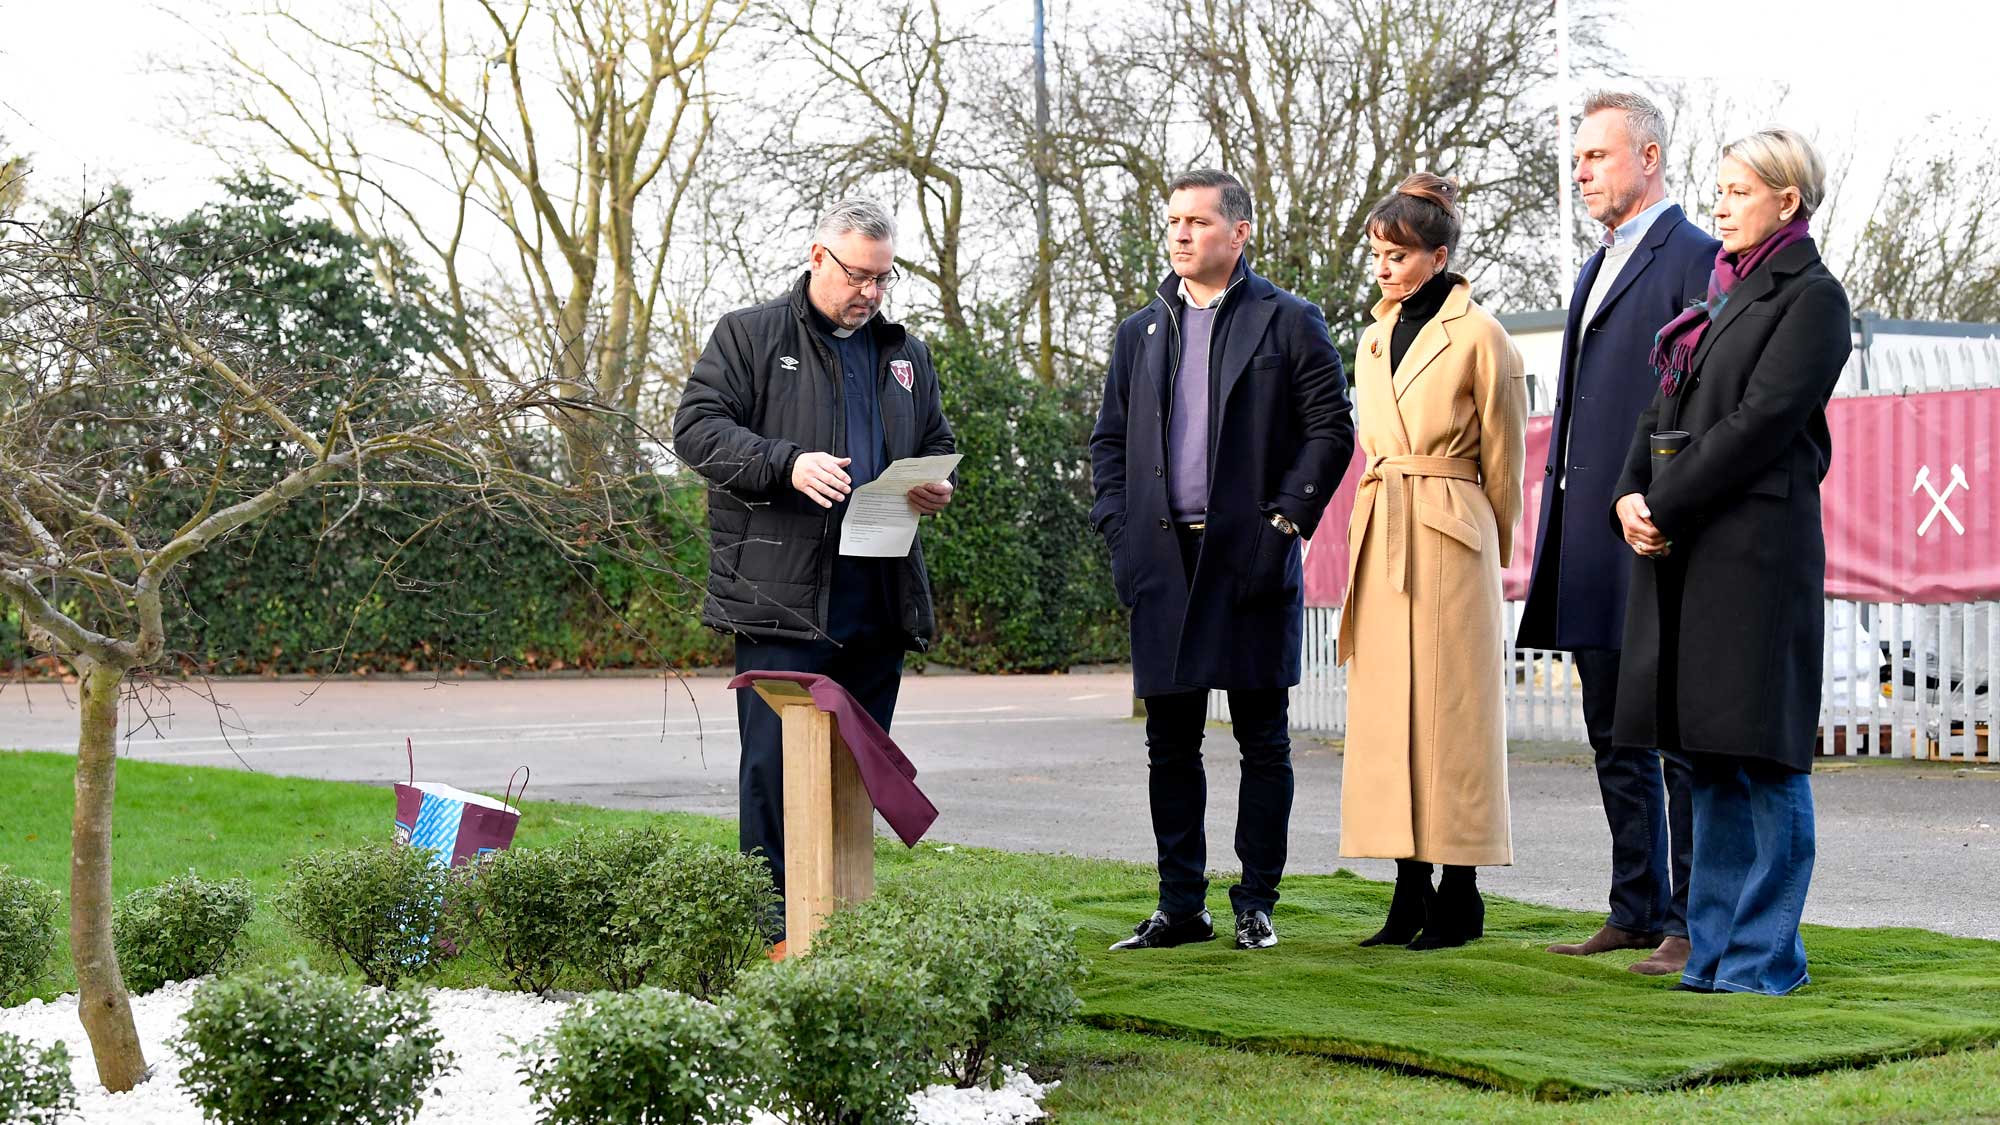 Club Chaplain Reverend Phil Wright led a blessing at Rush Green training ground